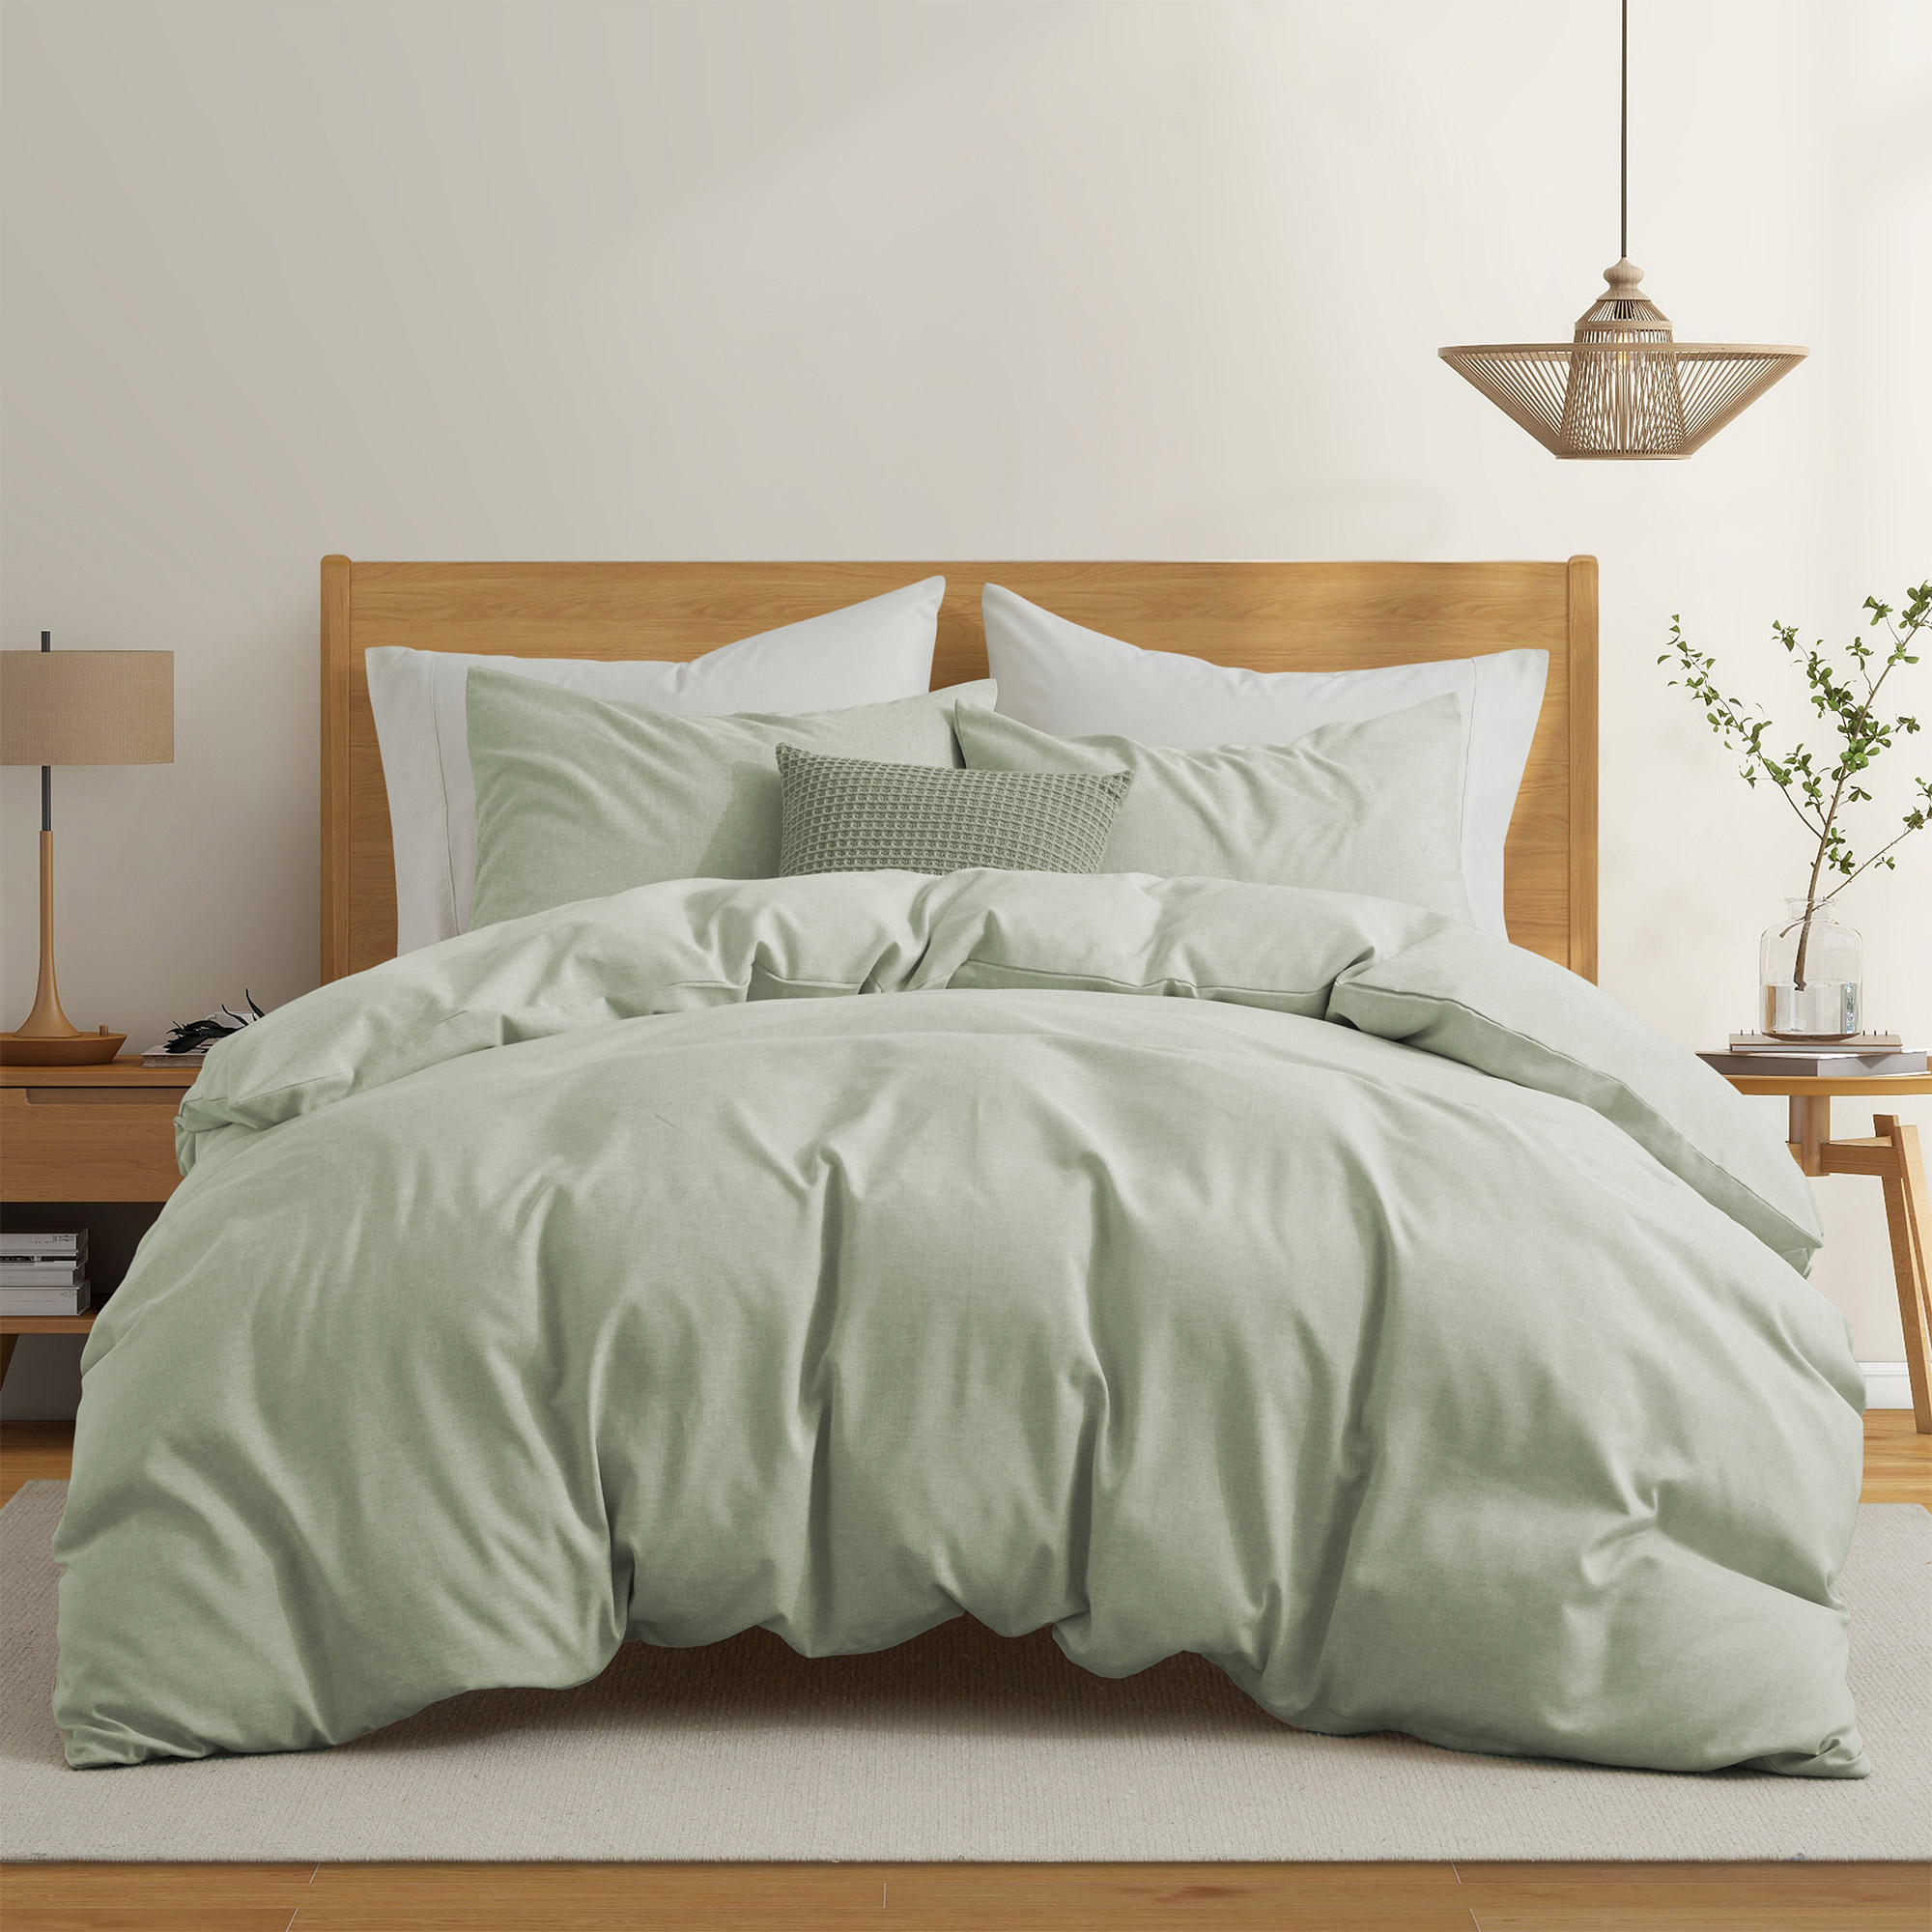 Solid Faux Linen Duvet Cover Set With Shams - Luxurious Comfort - Green, Full/Queen-90x90